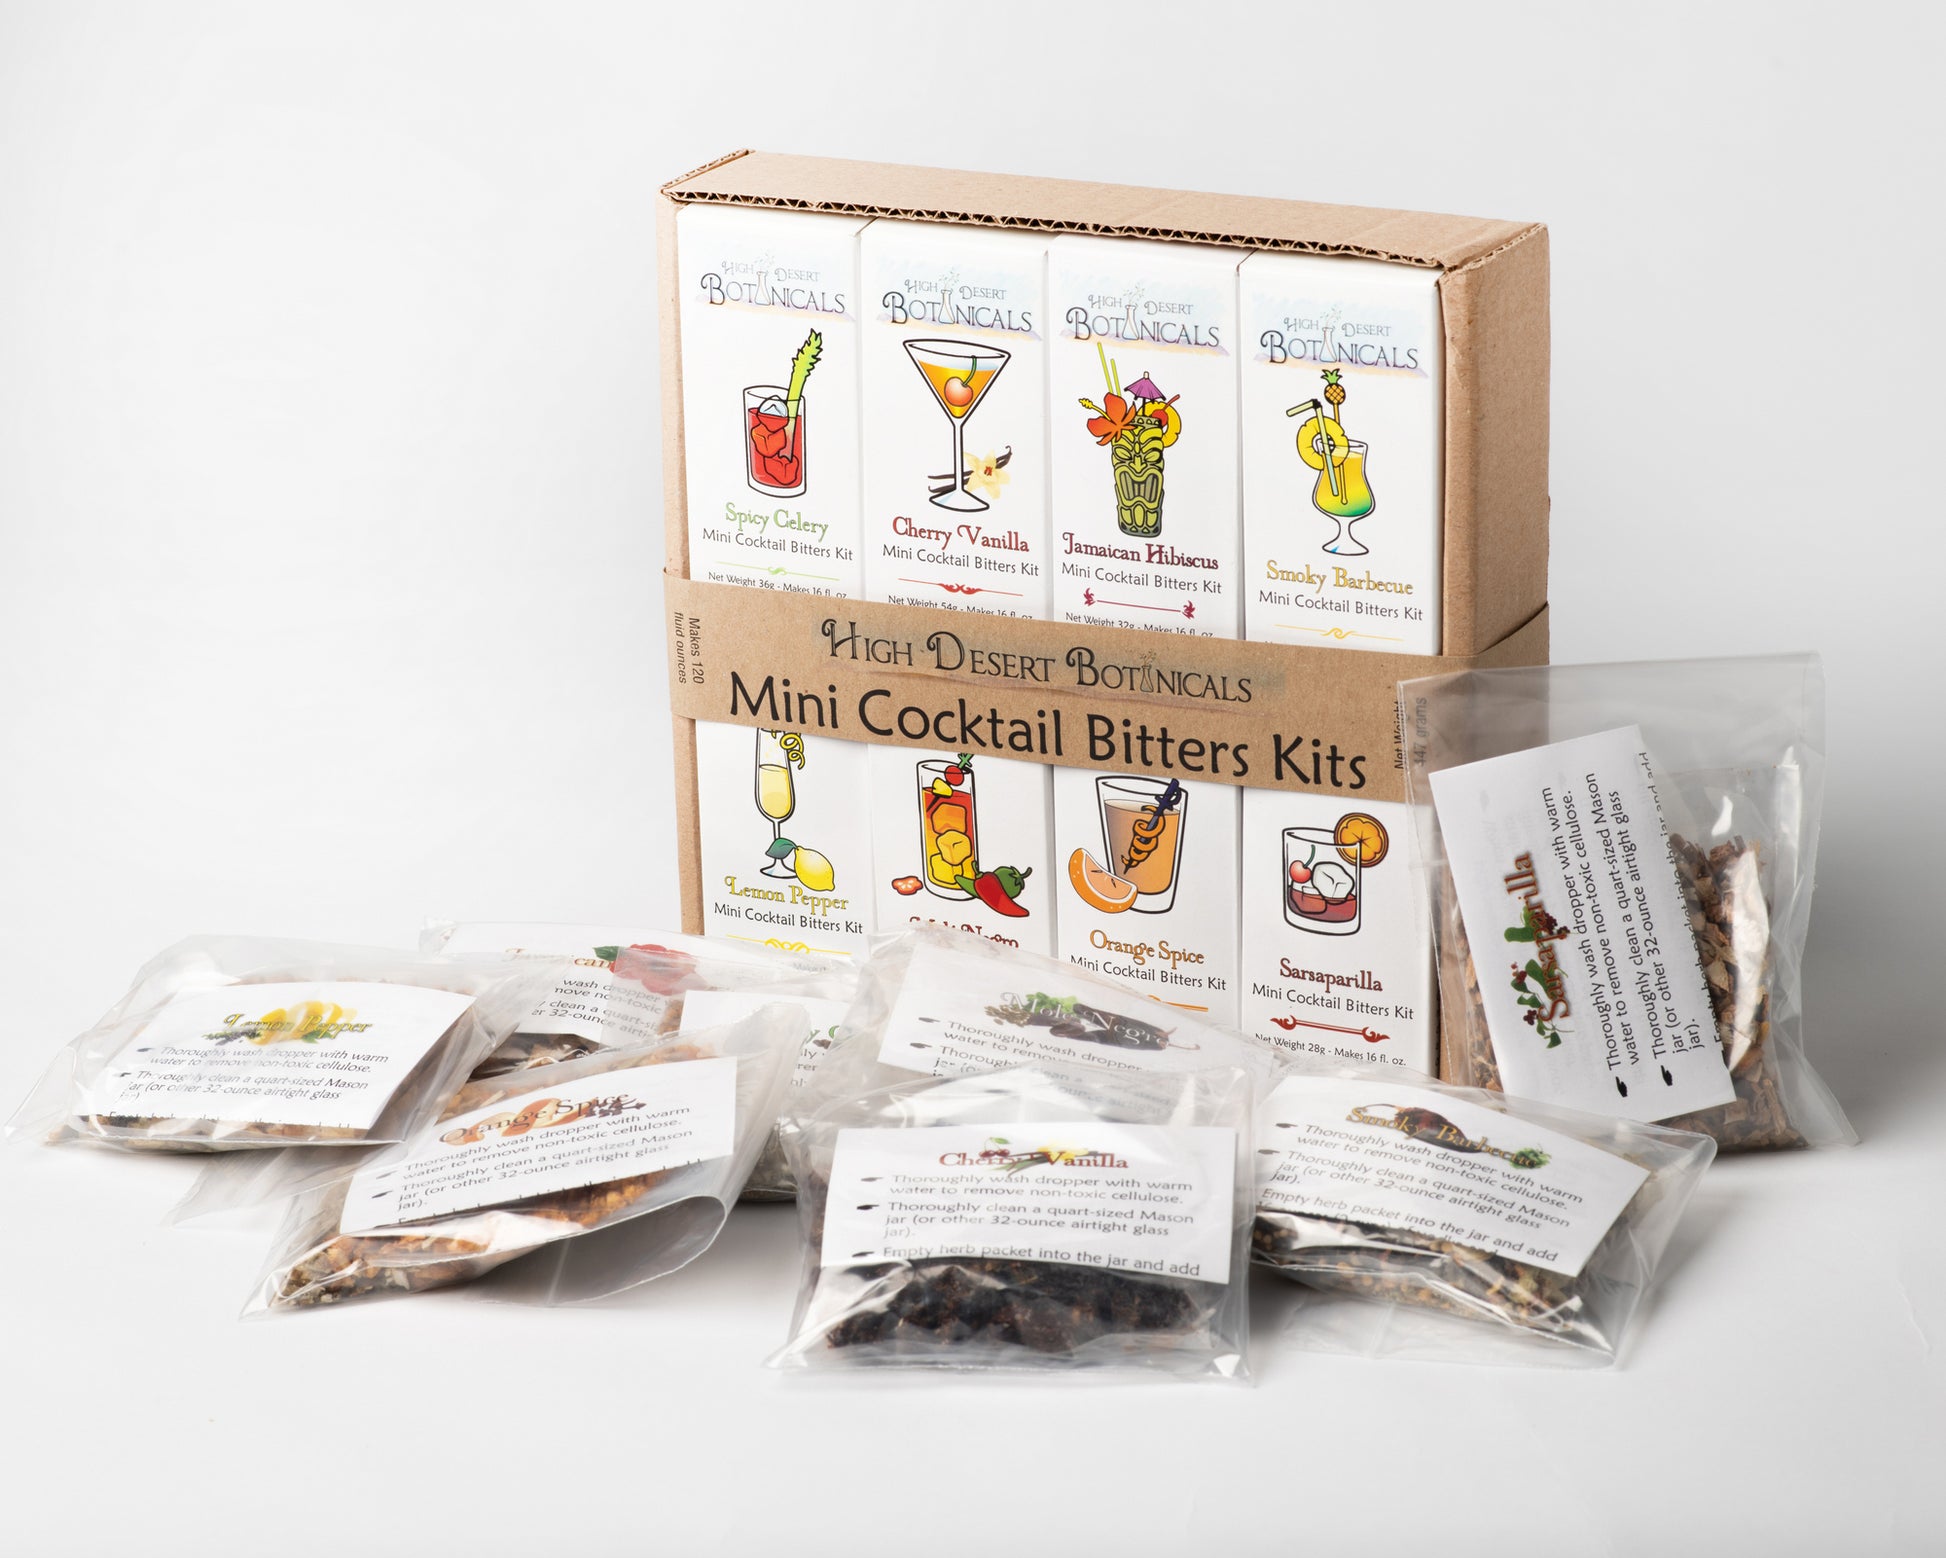 Special! - Save $5 - Mini Bitters Kit and Dasher Bottle